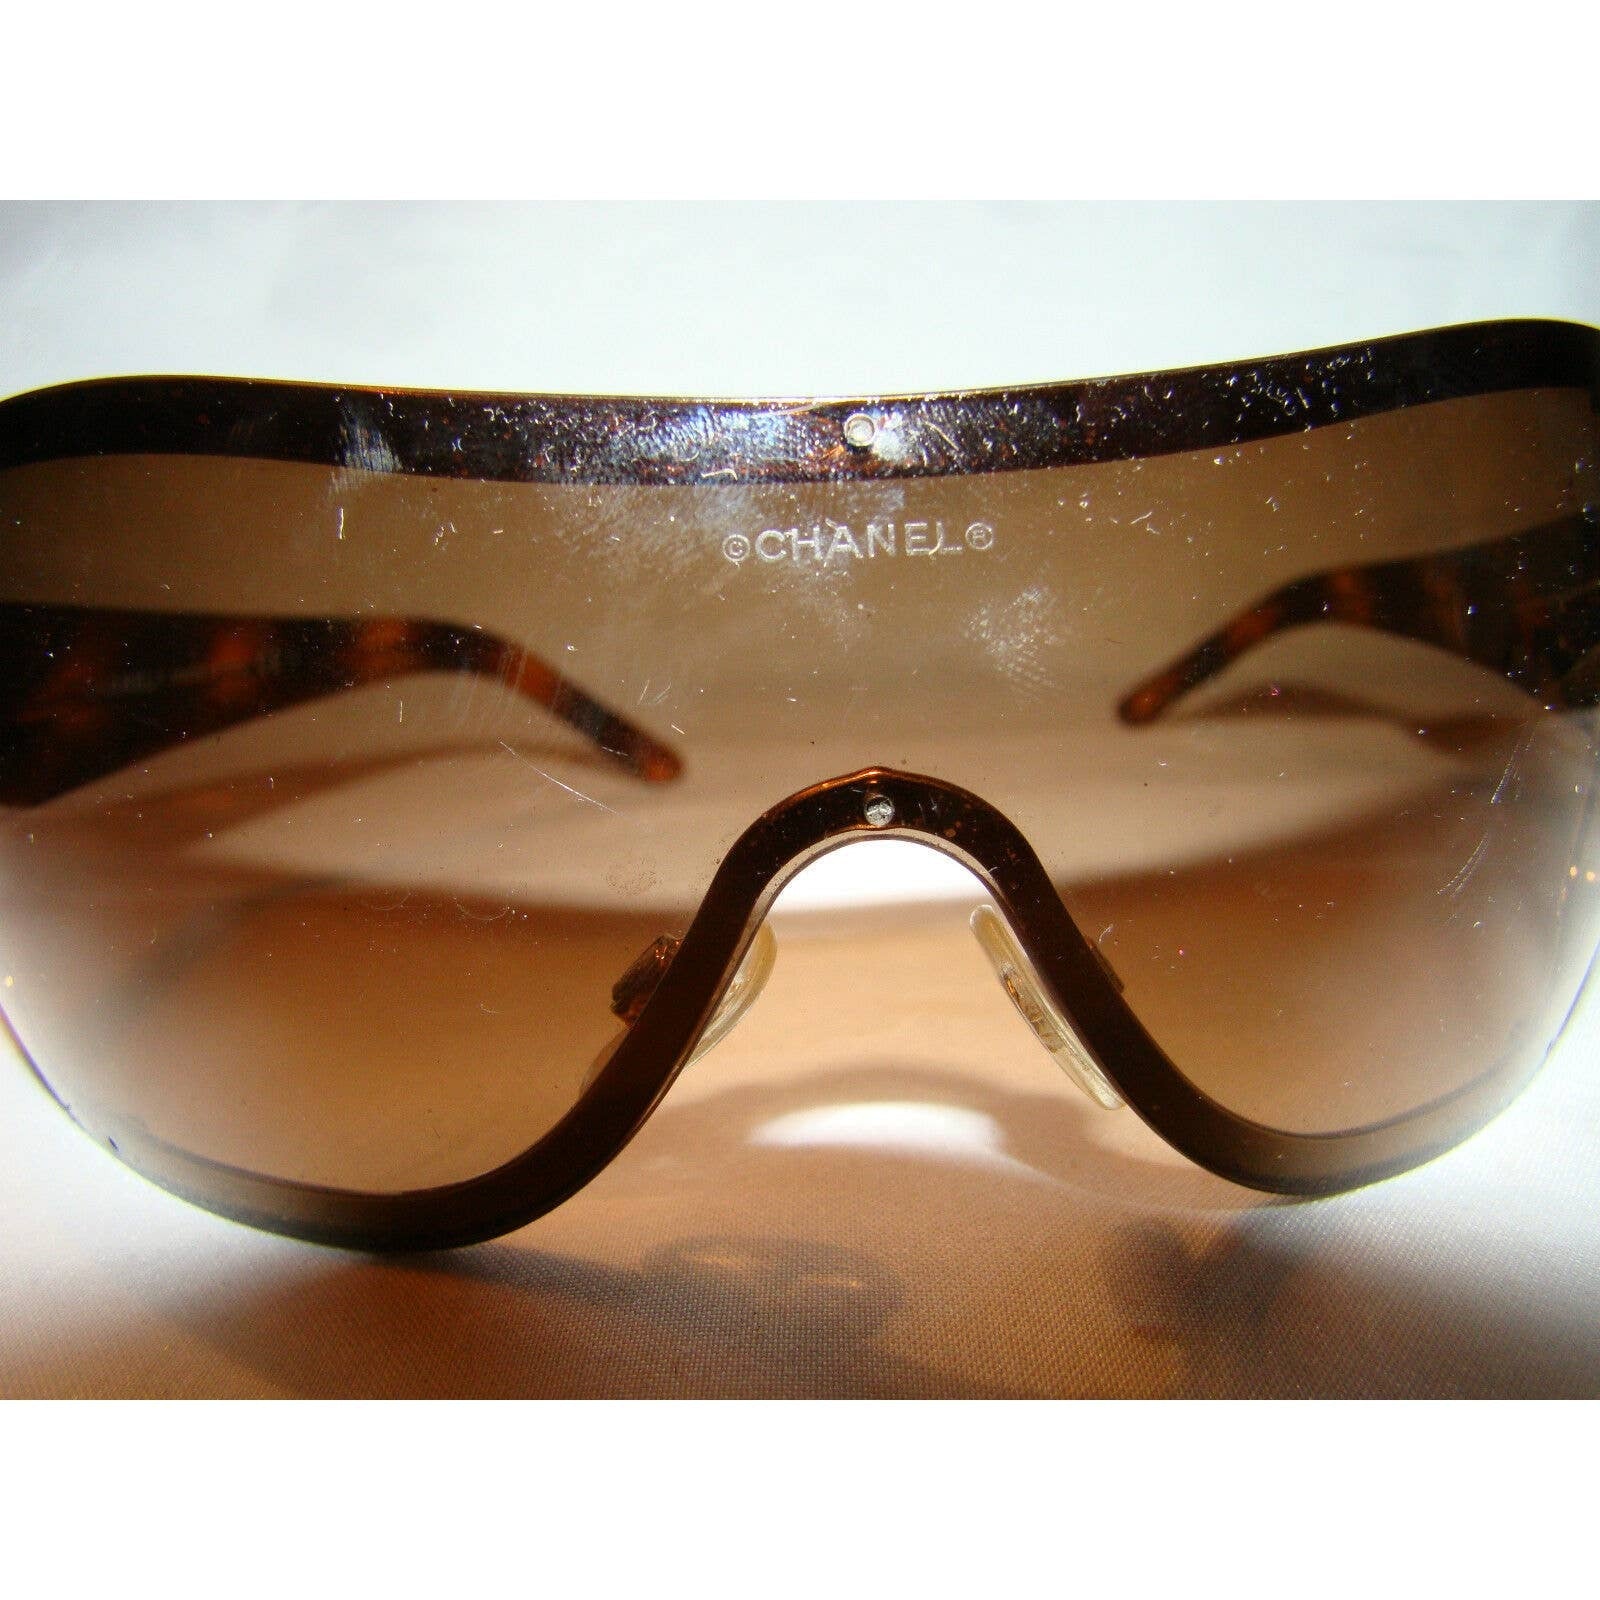 Vintage 00s 3) Chanel Tortoise Shell Oversized Shield Sunglass By Chanel, Shop THRILLING